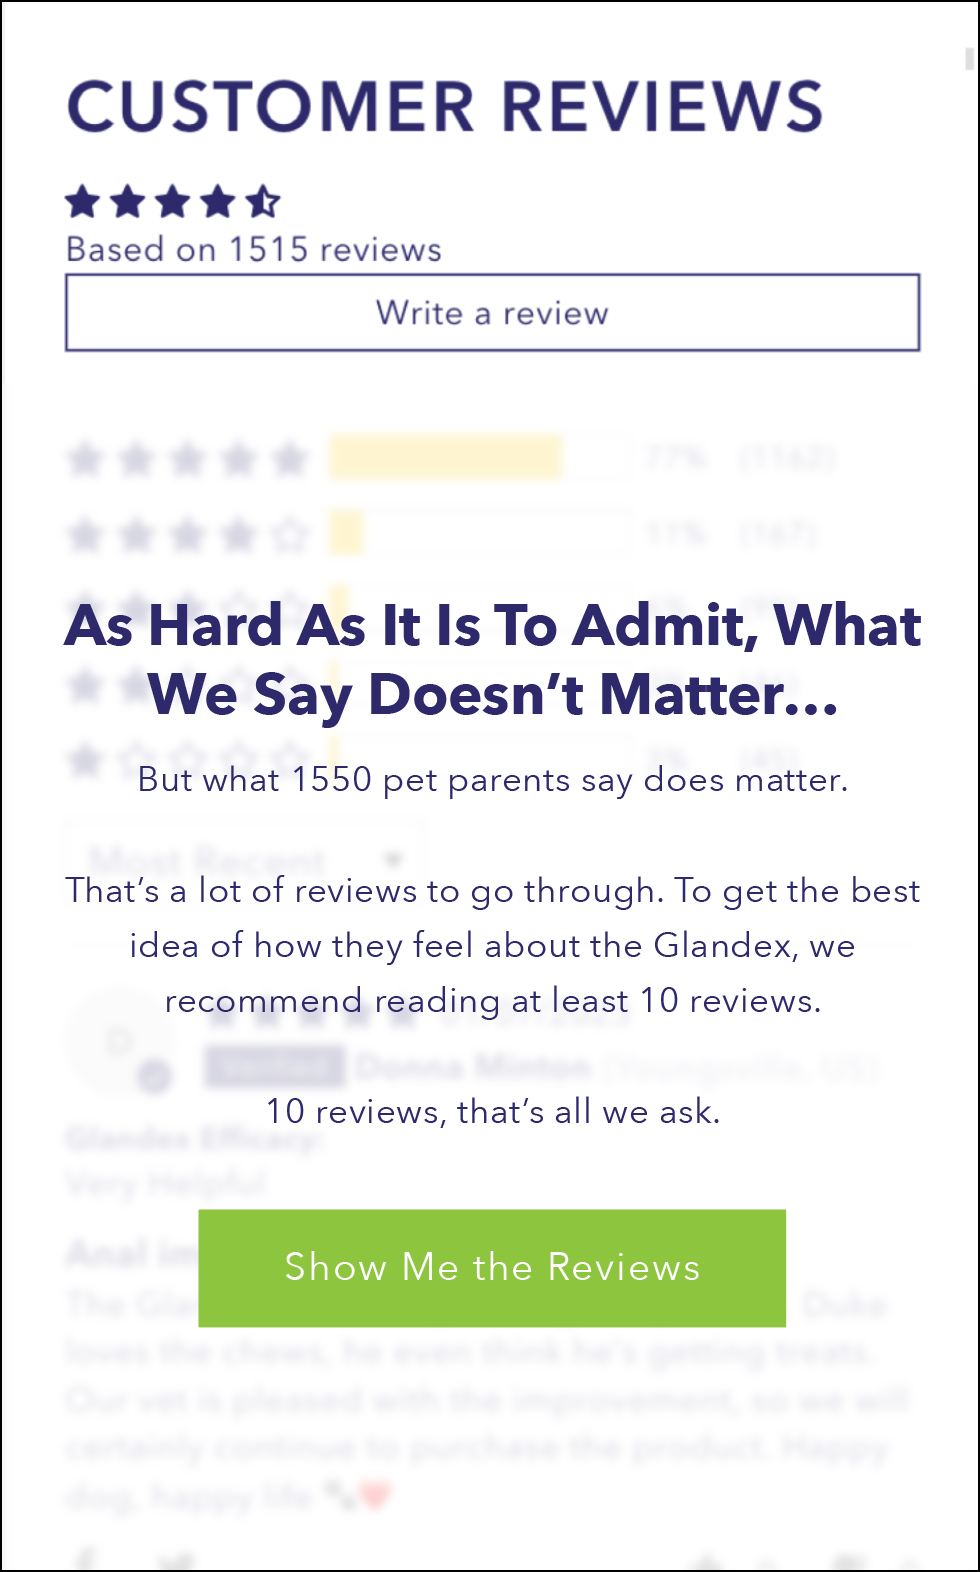 The reviews section updates